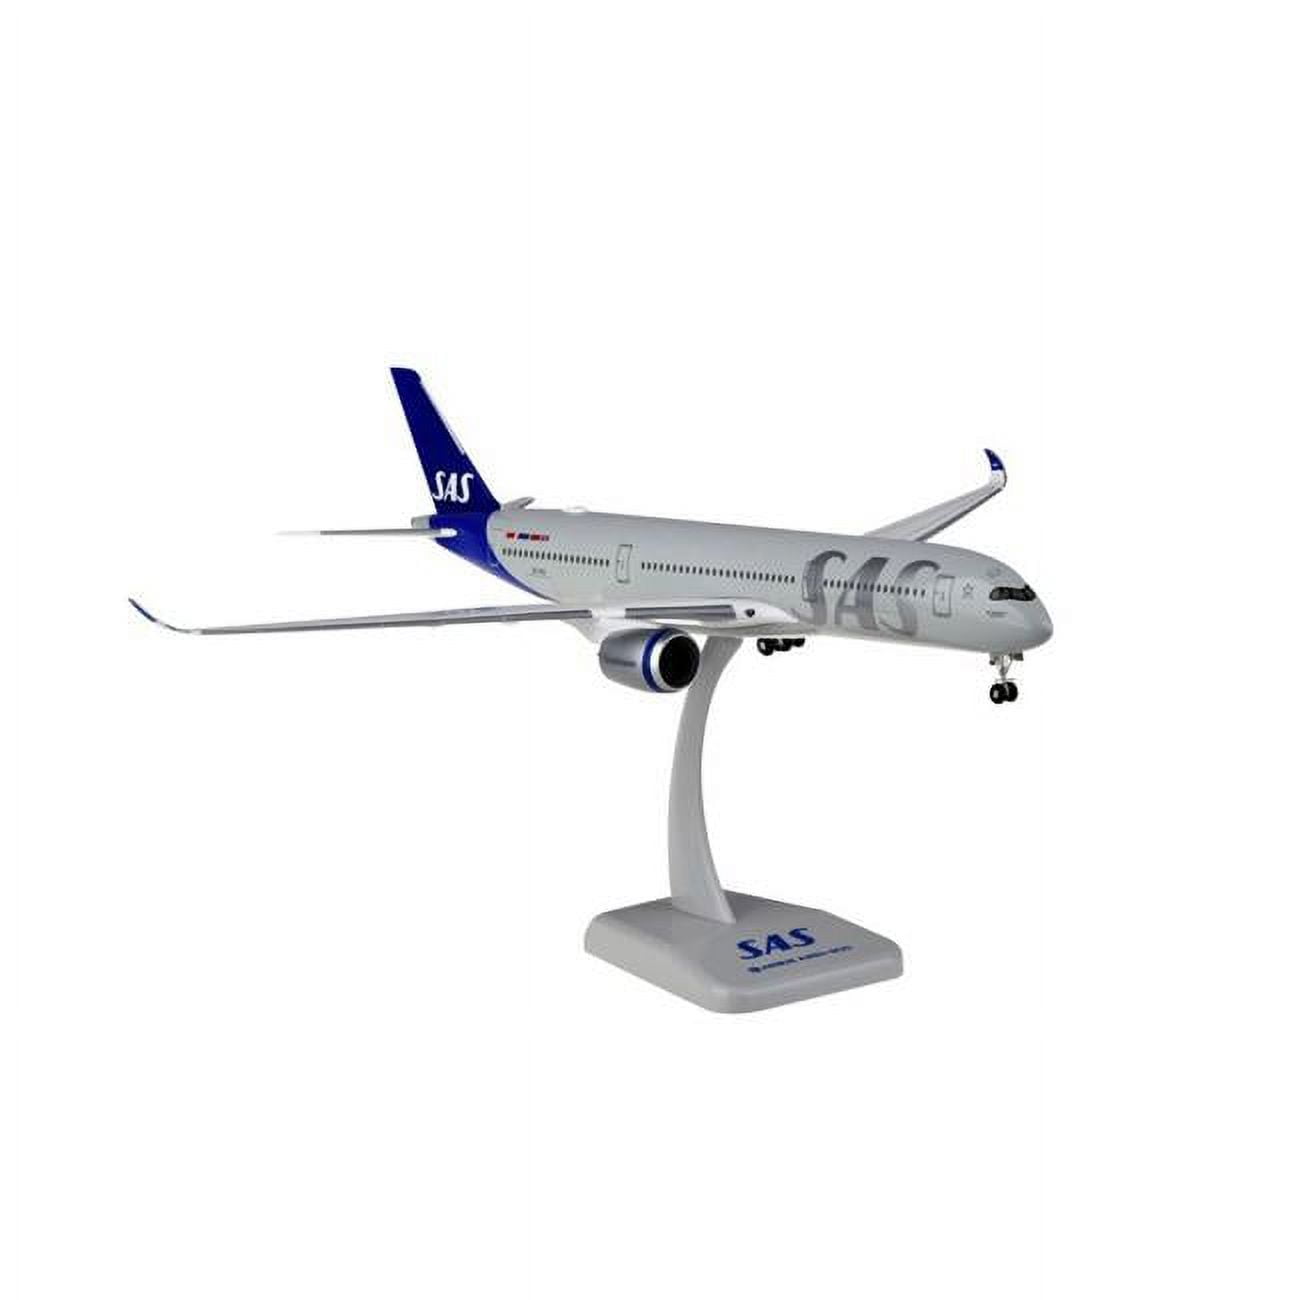 Time2Play SAS A350-900 with Gear REG No. SE-RSA Model Airplane - 1-200 Scale Commercial Model